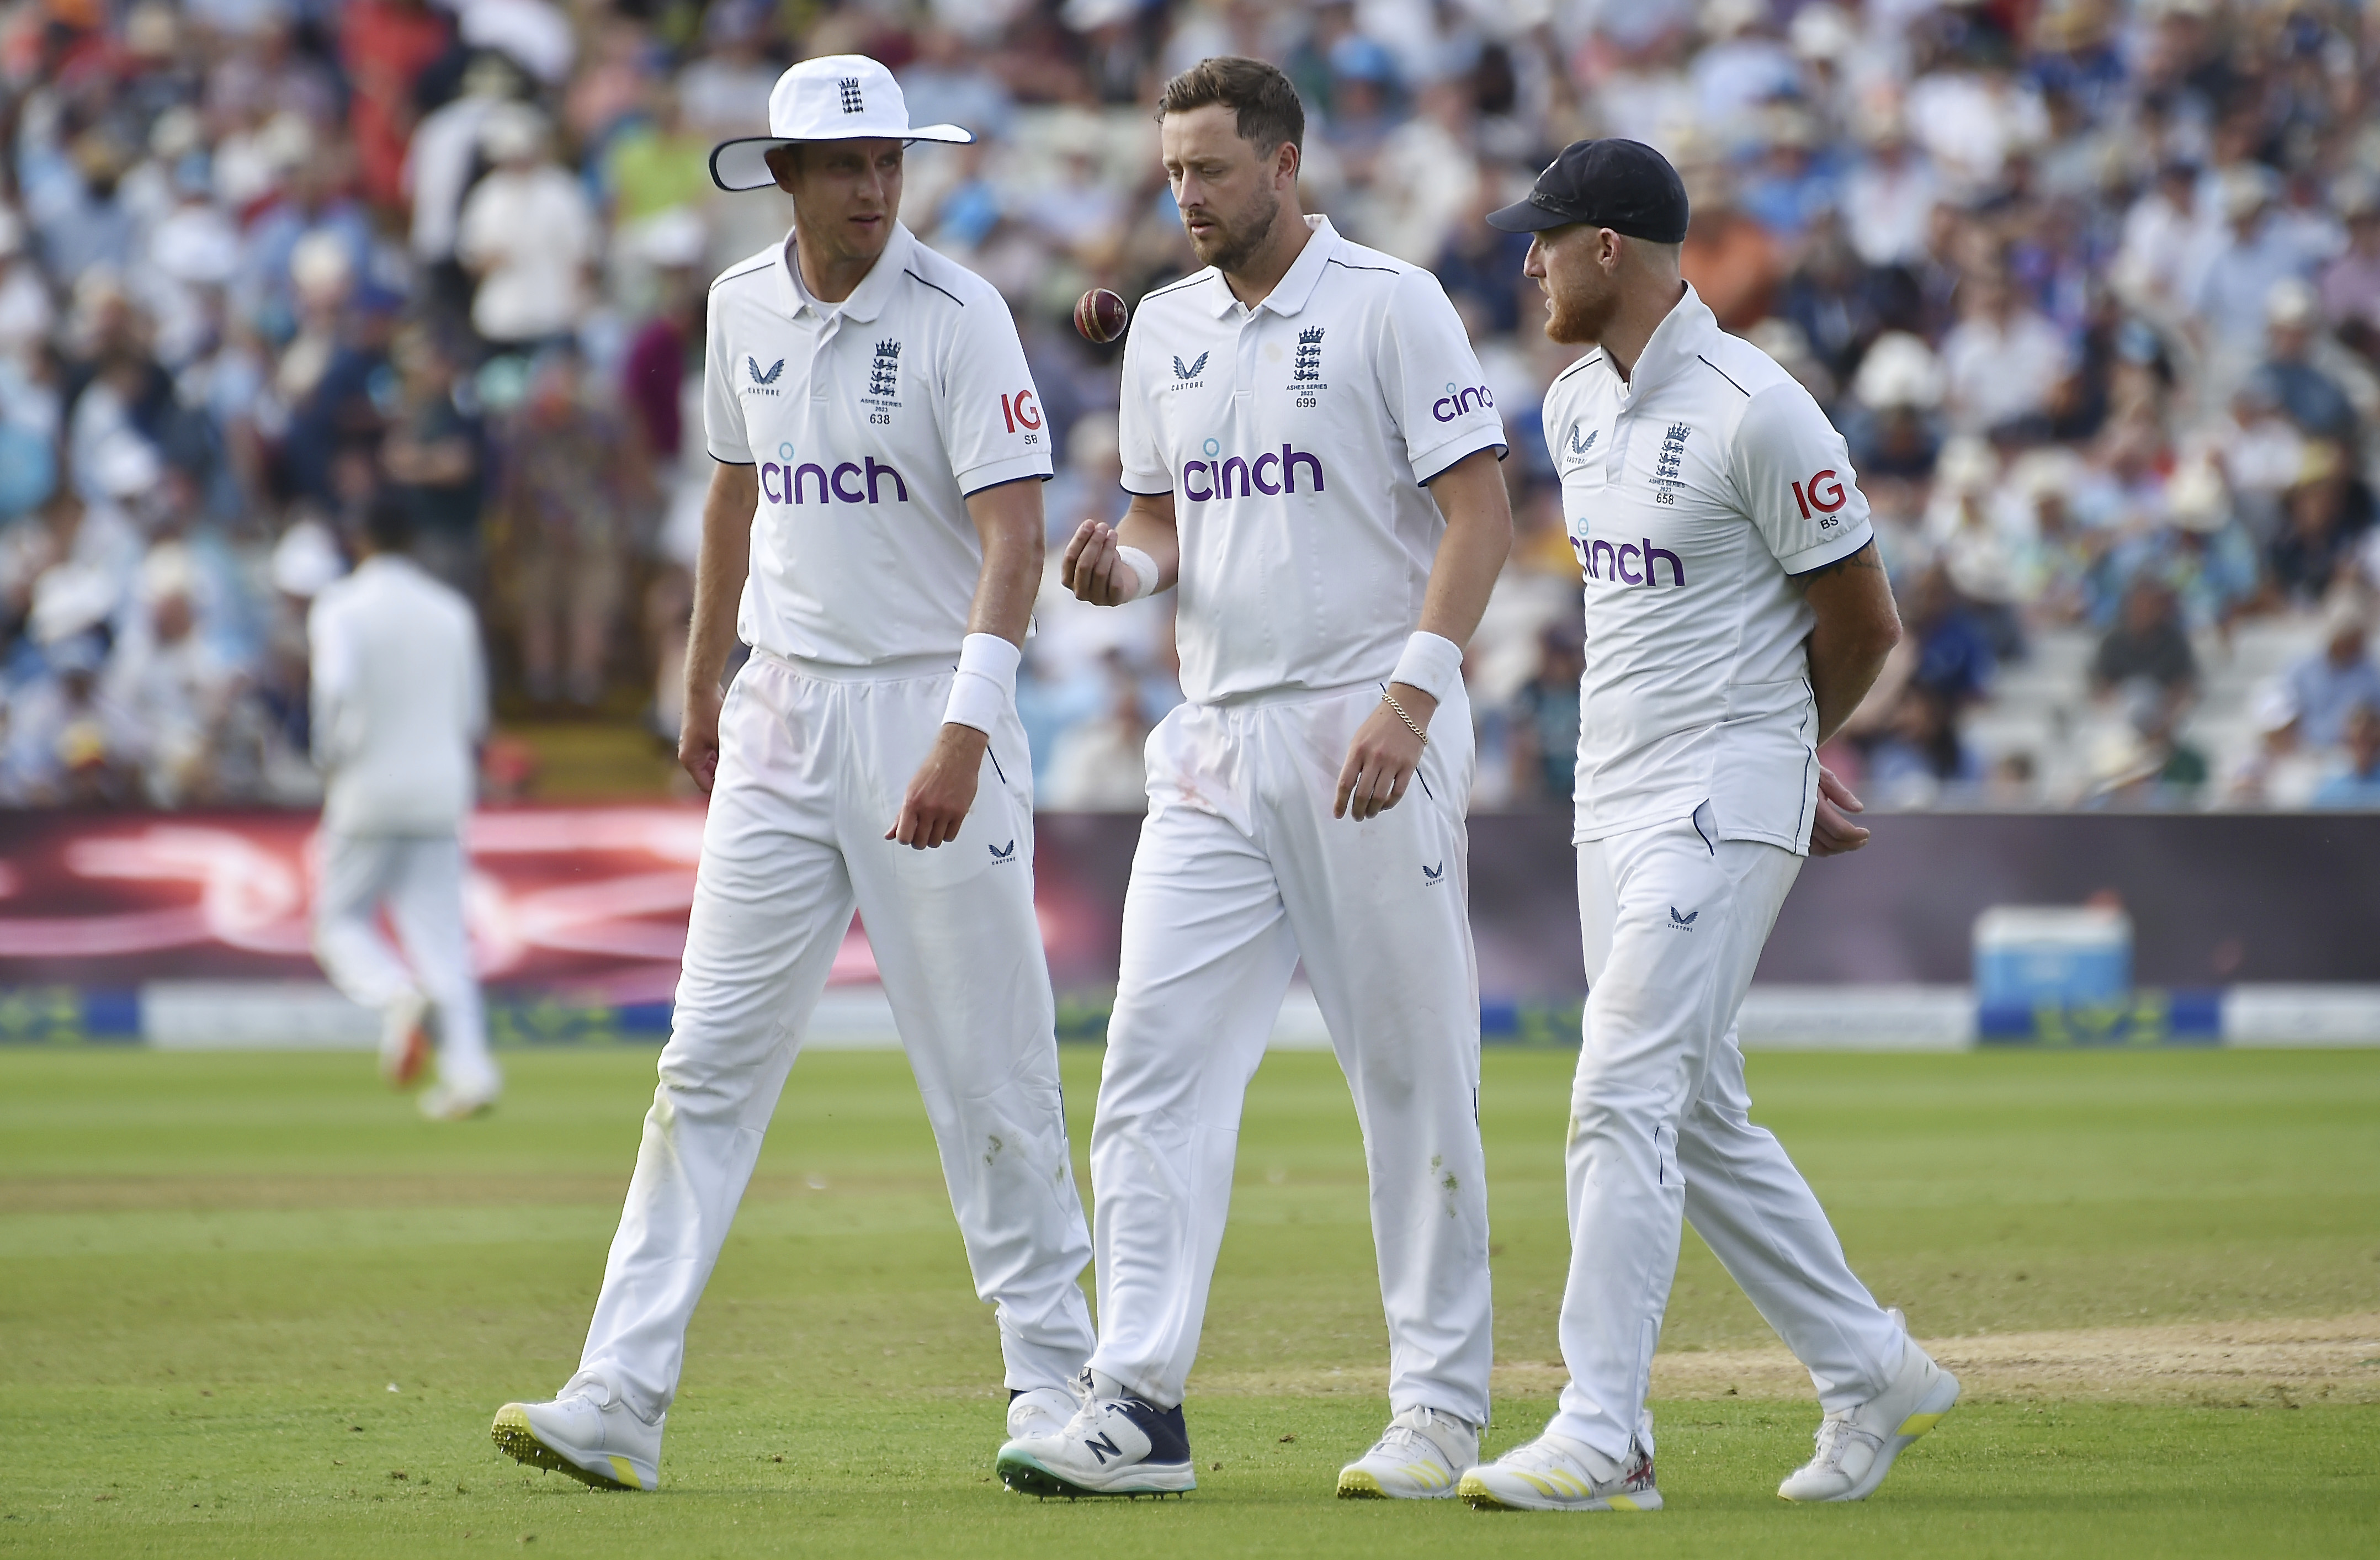 England's Stuart Broad, Ollie Robinson and captain Ben Stokes were on the side which narrowly lost the 1st Ashes Test against Australia at Edgbaston